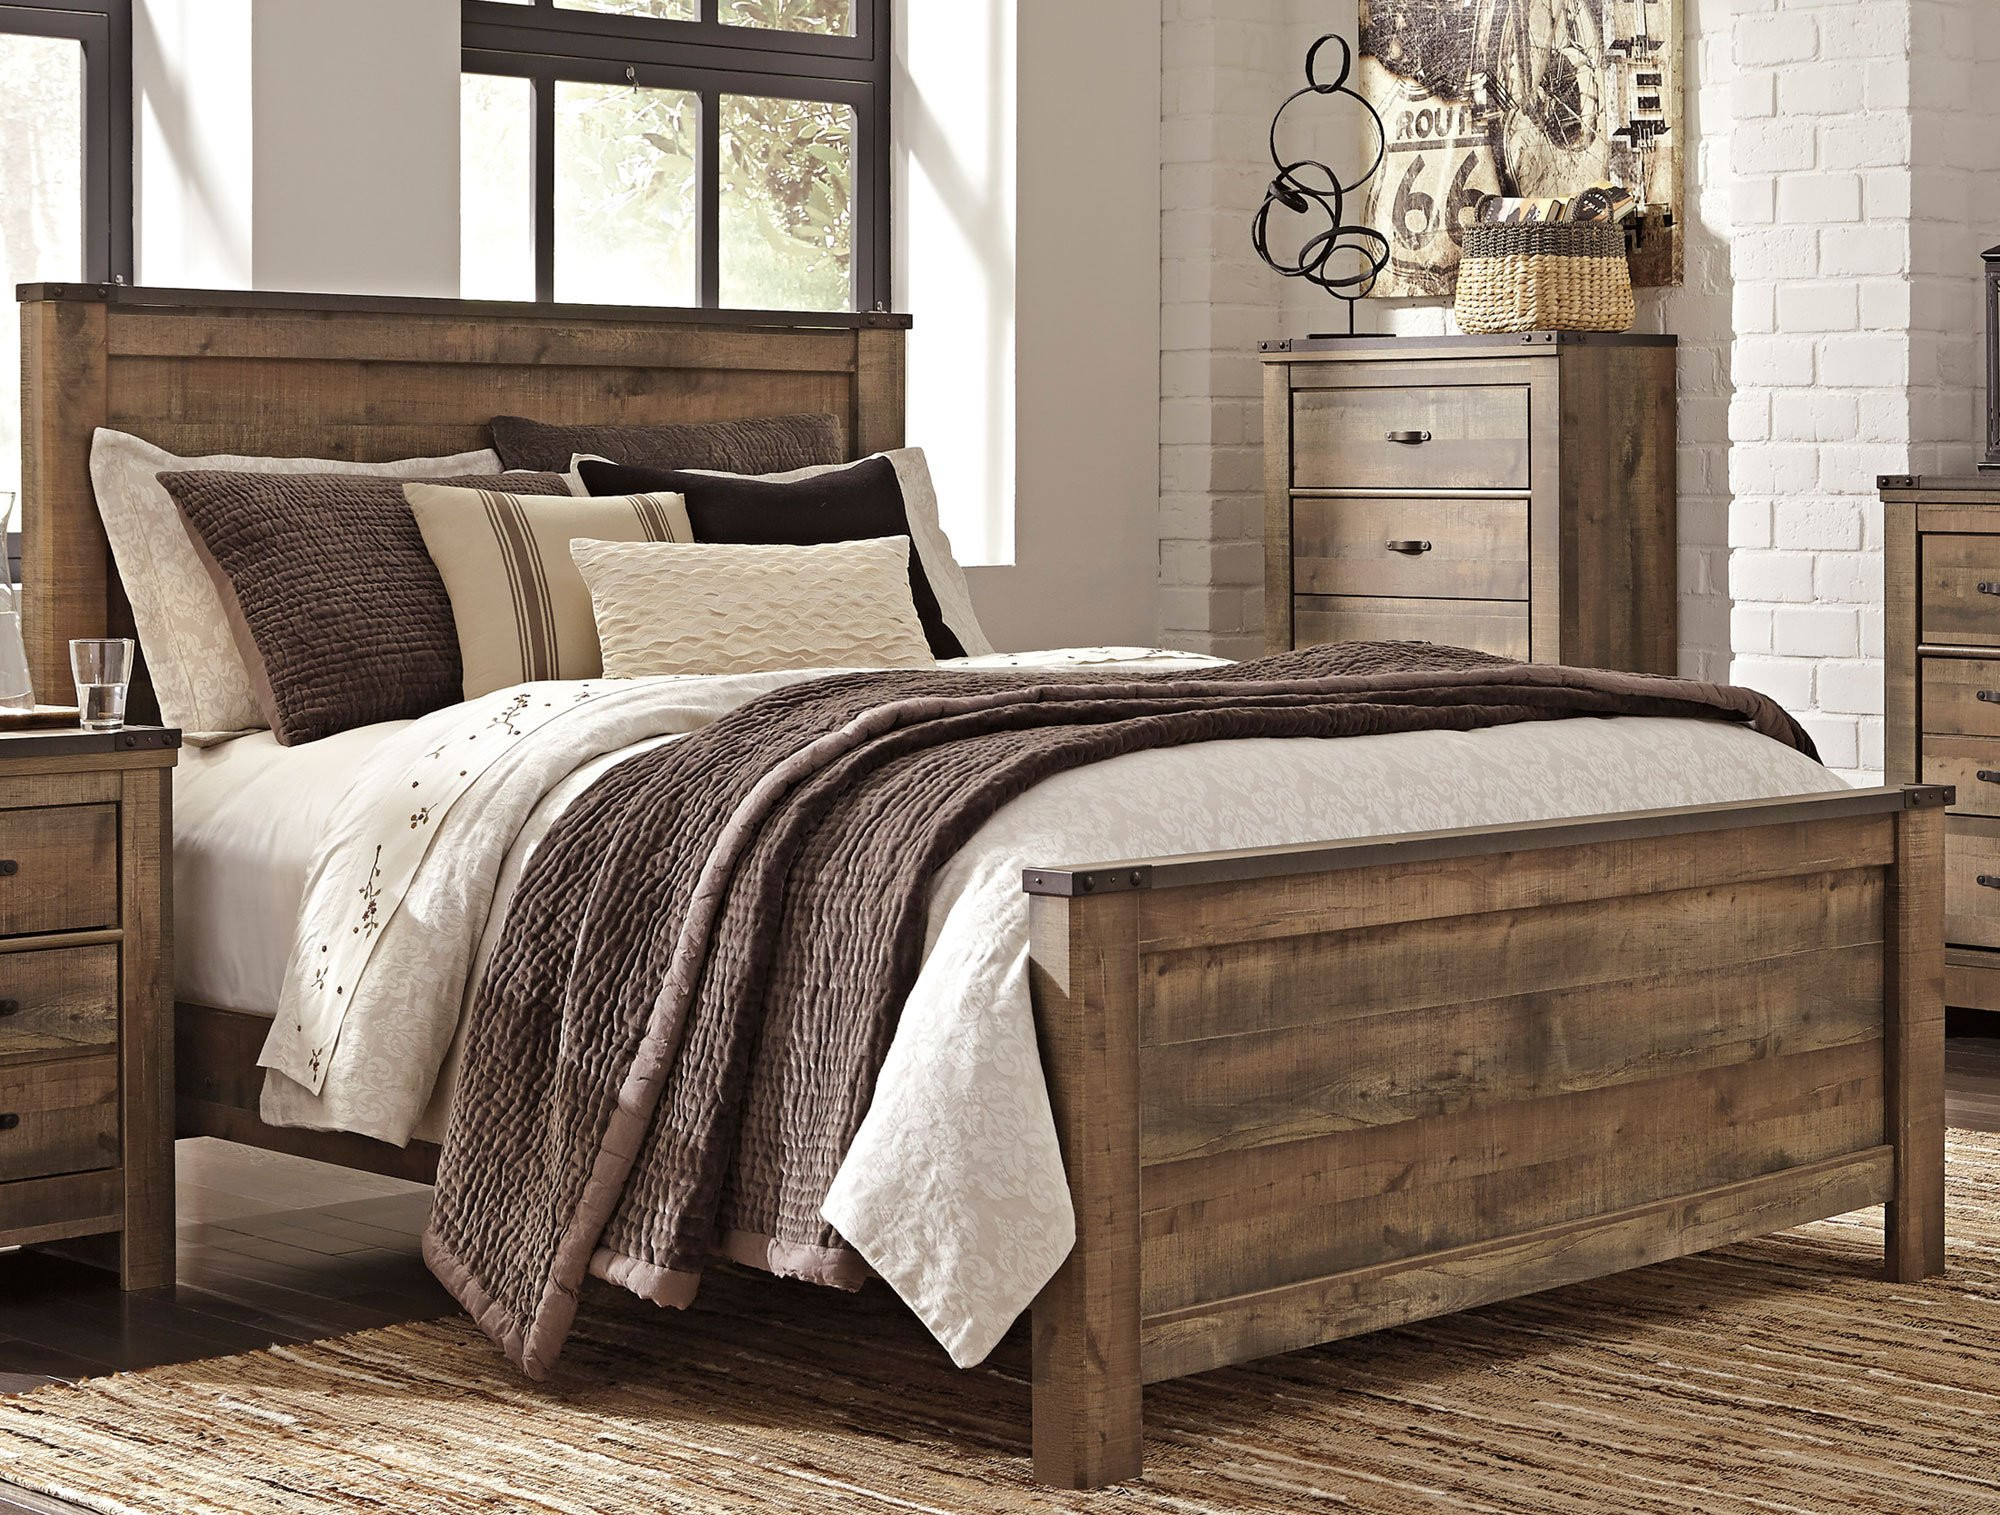 Rustic King Size Bedroom Sets
 Rustic Casual Contemporary 6 Piece King Bedroom Set